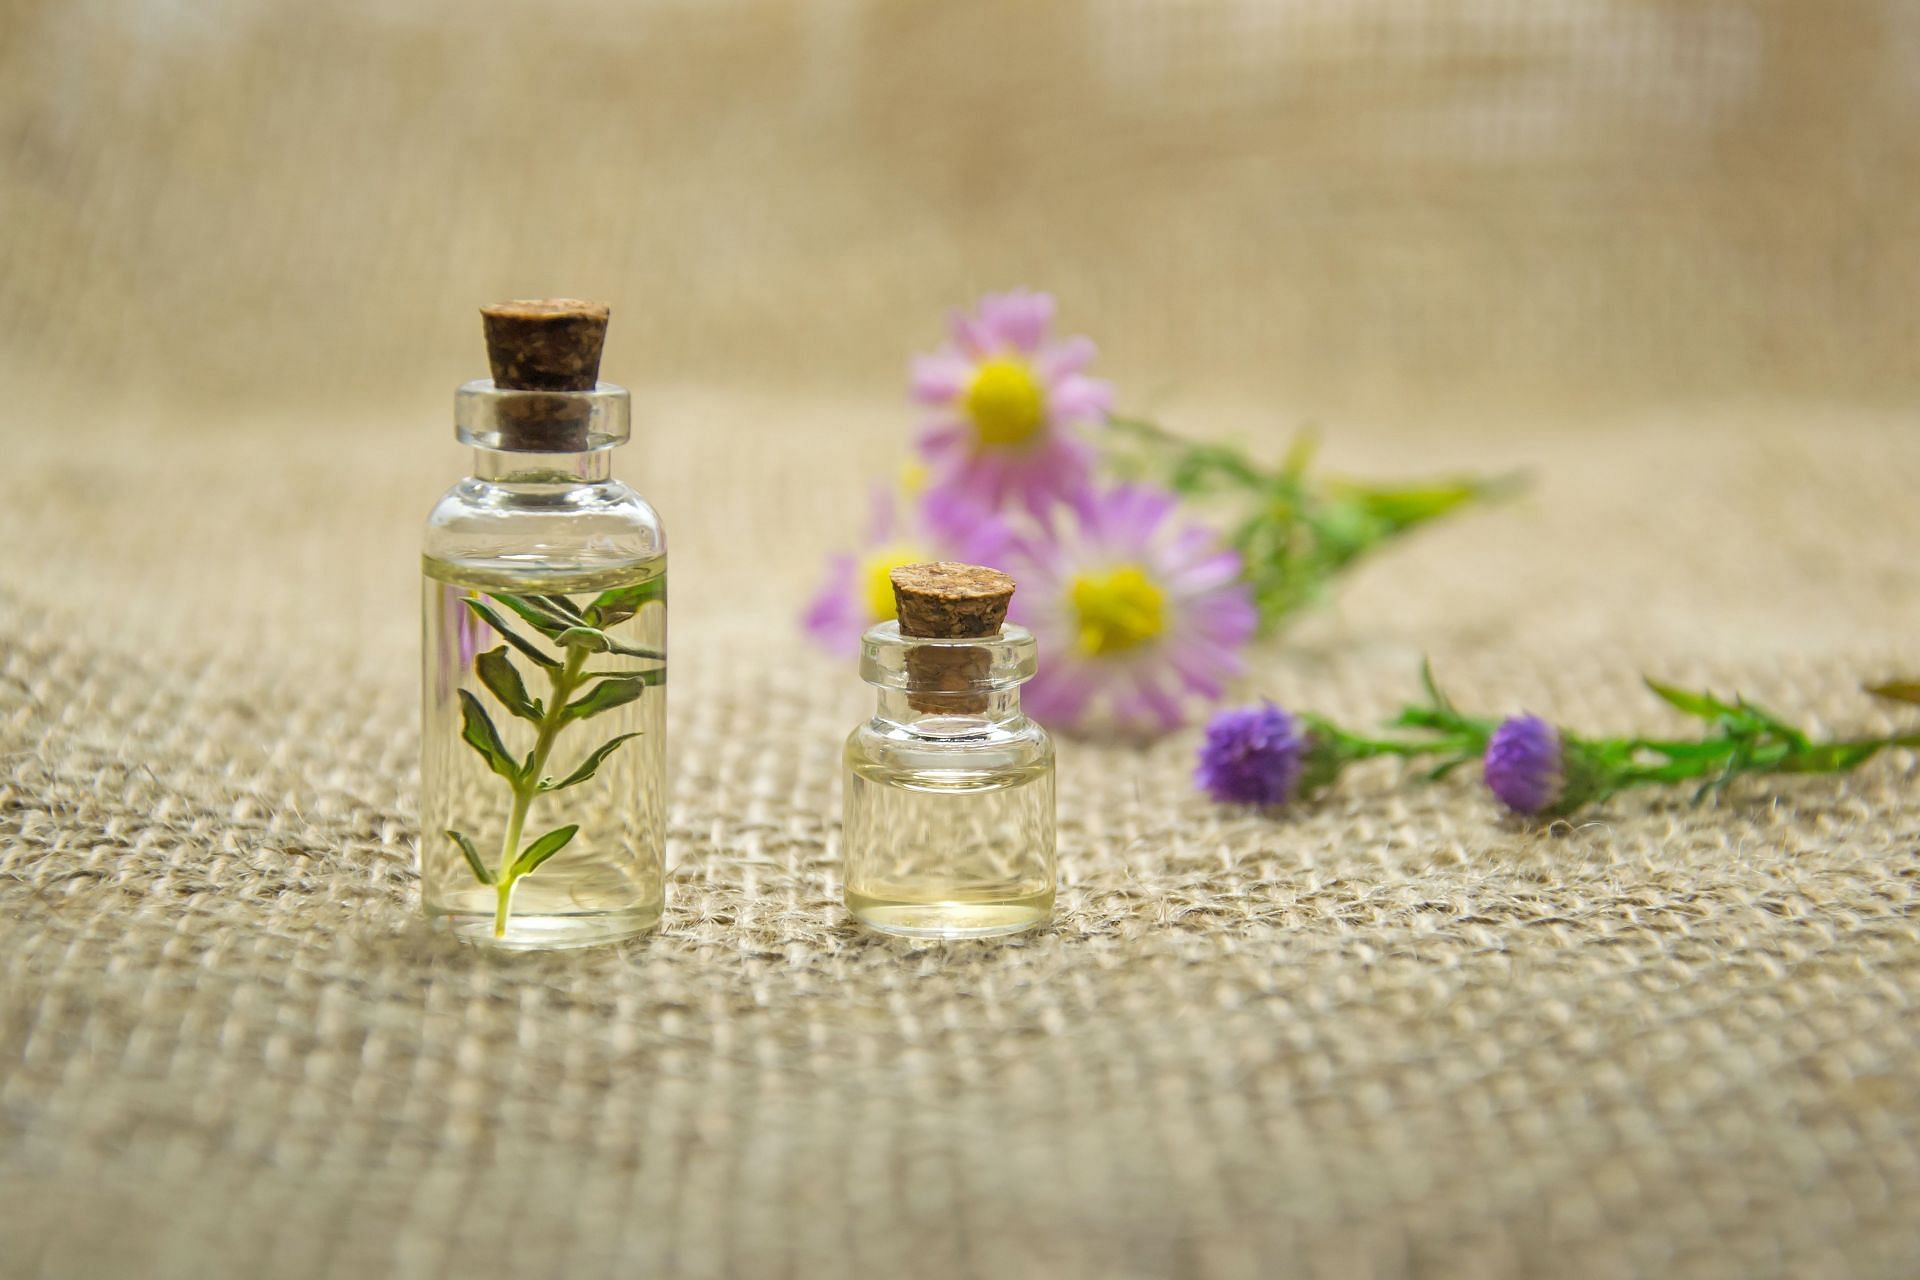 Aromatherapy can be used to supplement psychotherapy for stress relief. (Photo via Pexels/ Mareefe)